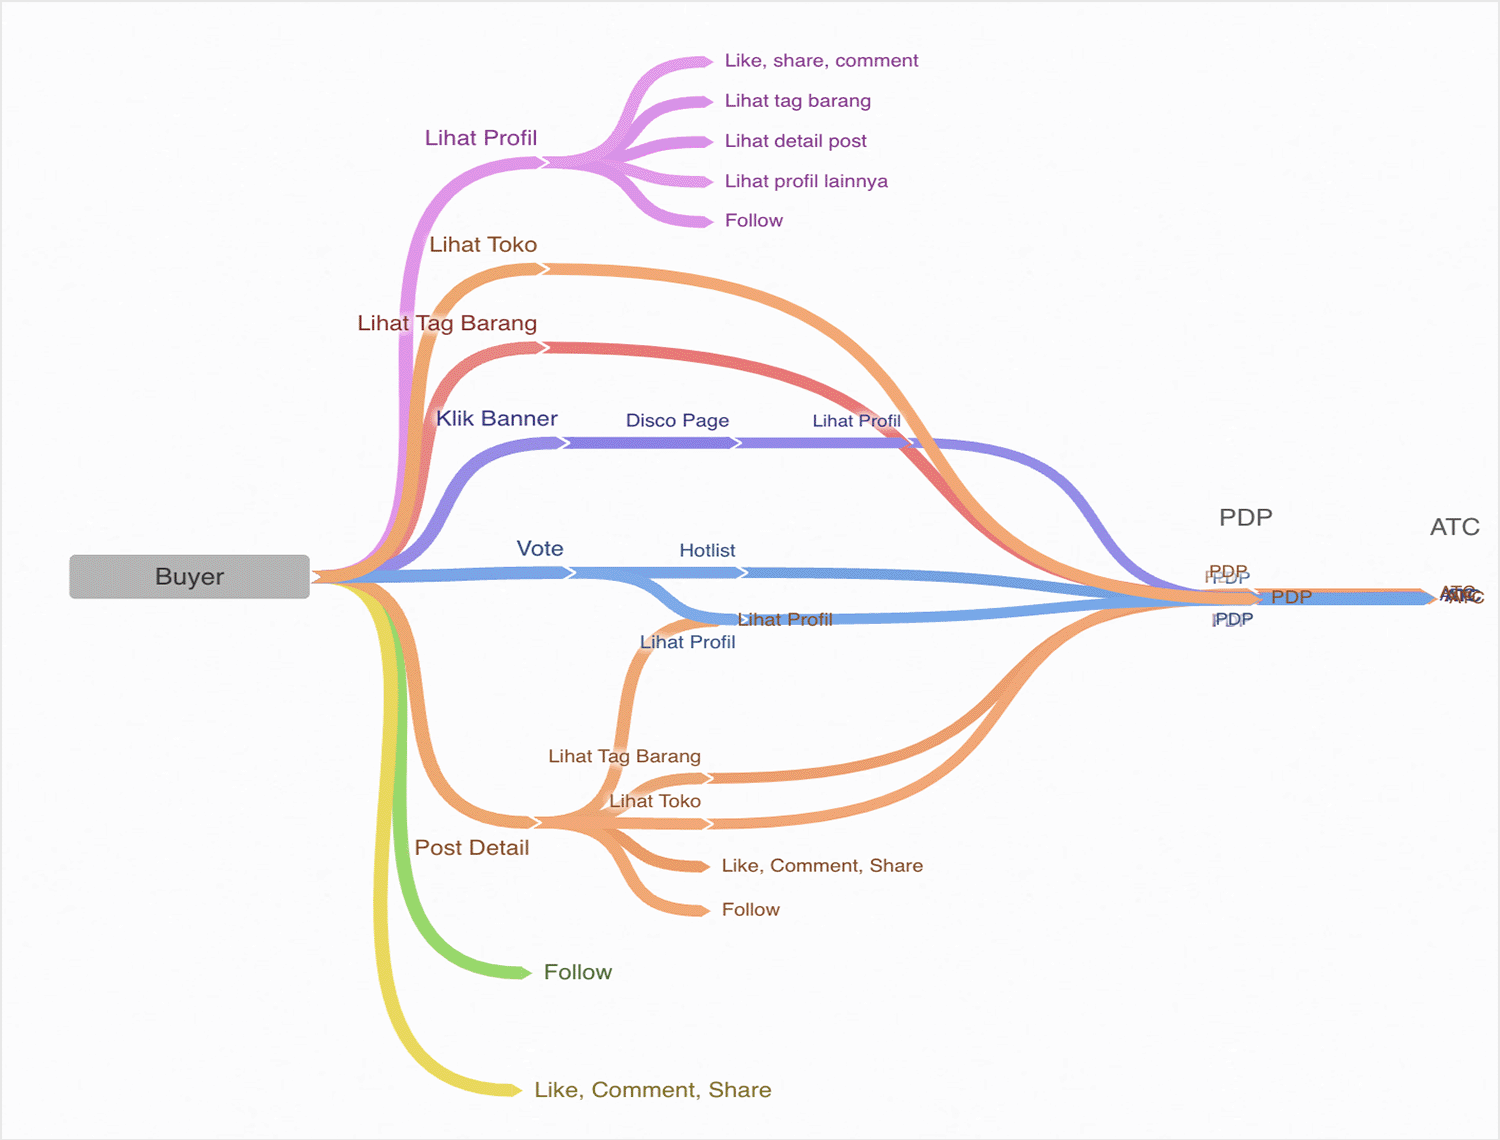 Coggle user flow diagram showing various user interactions and pathways from a buyer's perspective.